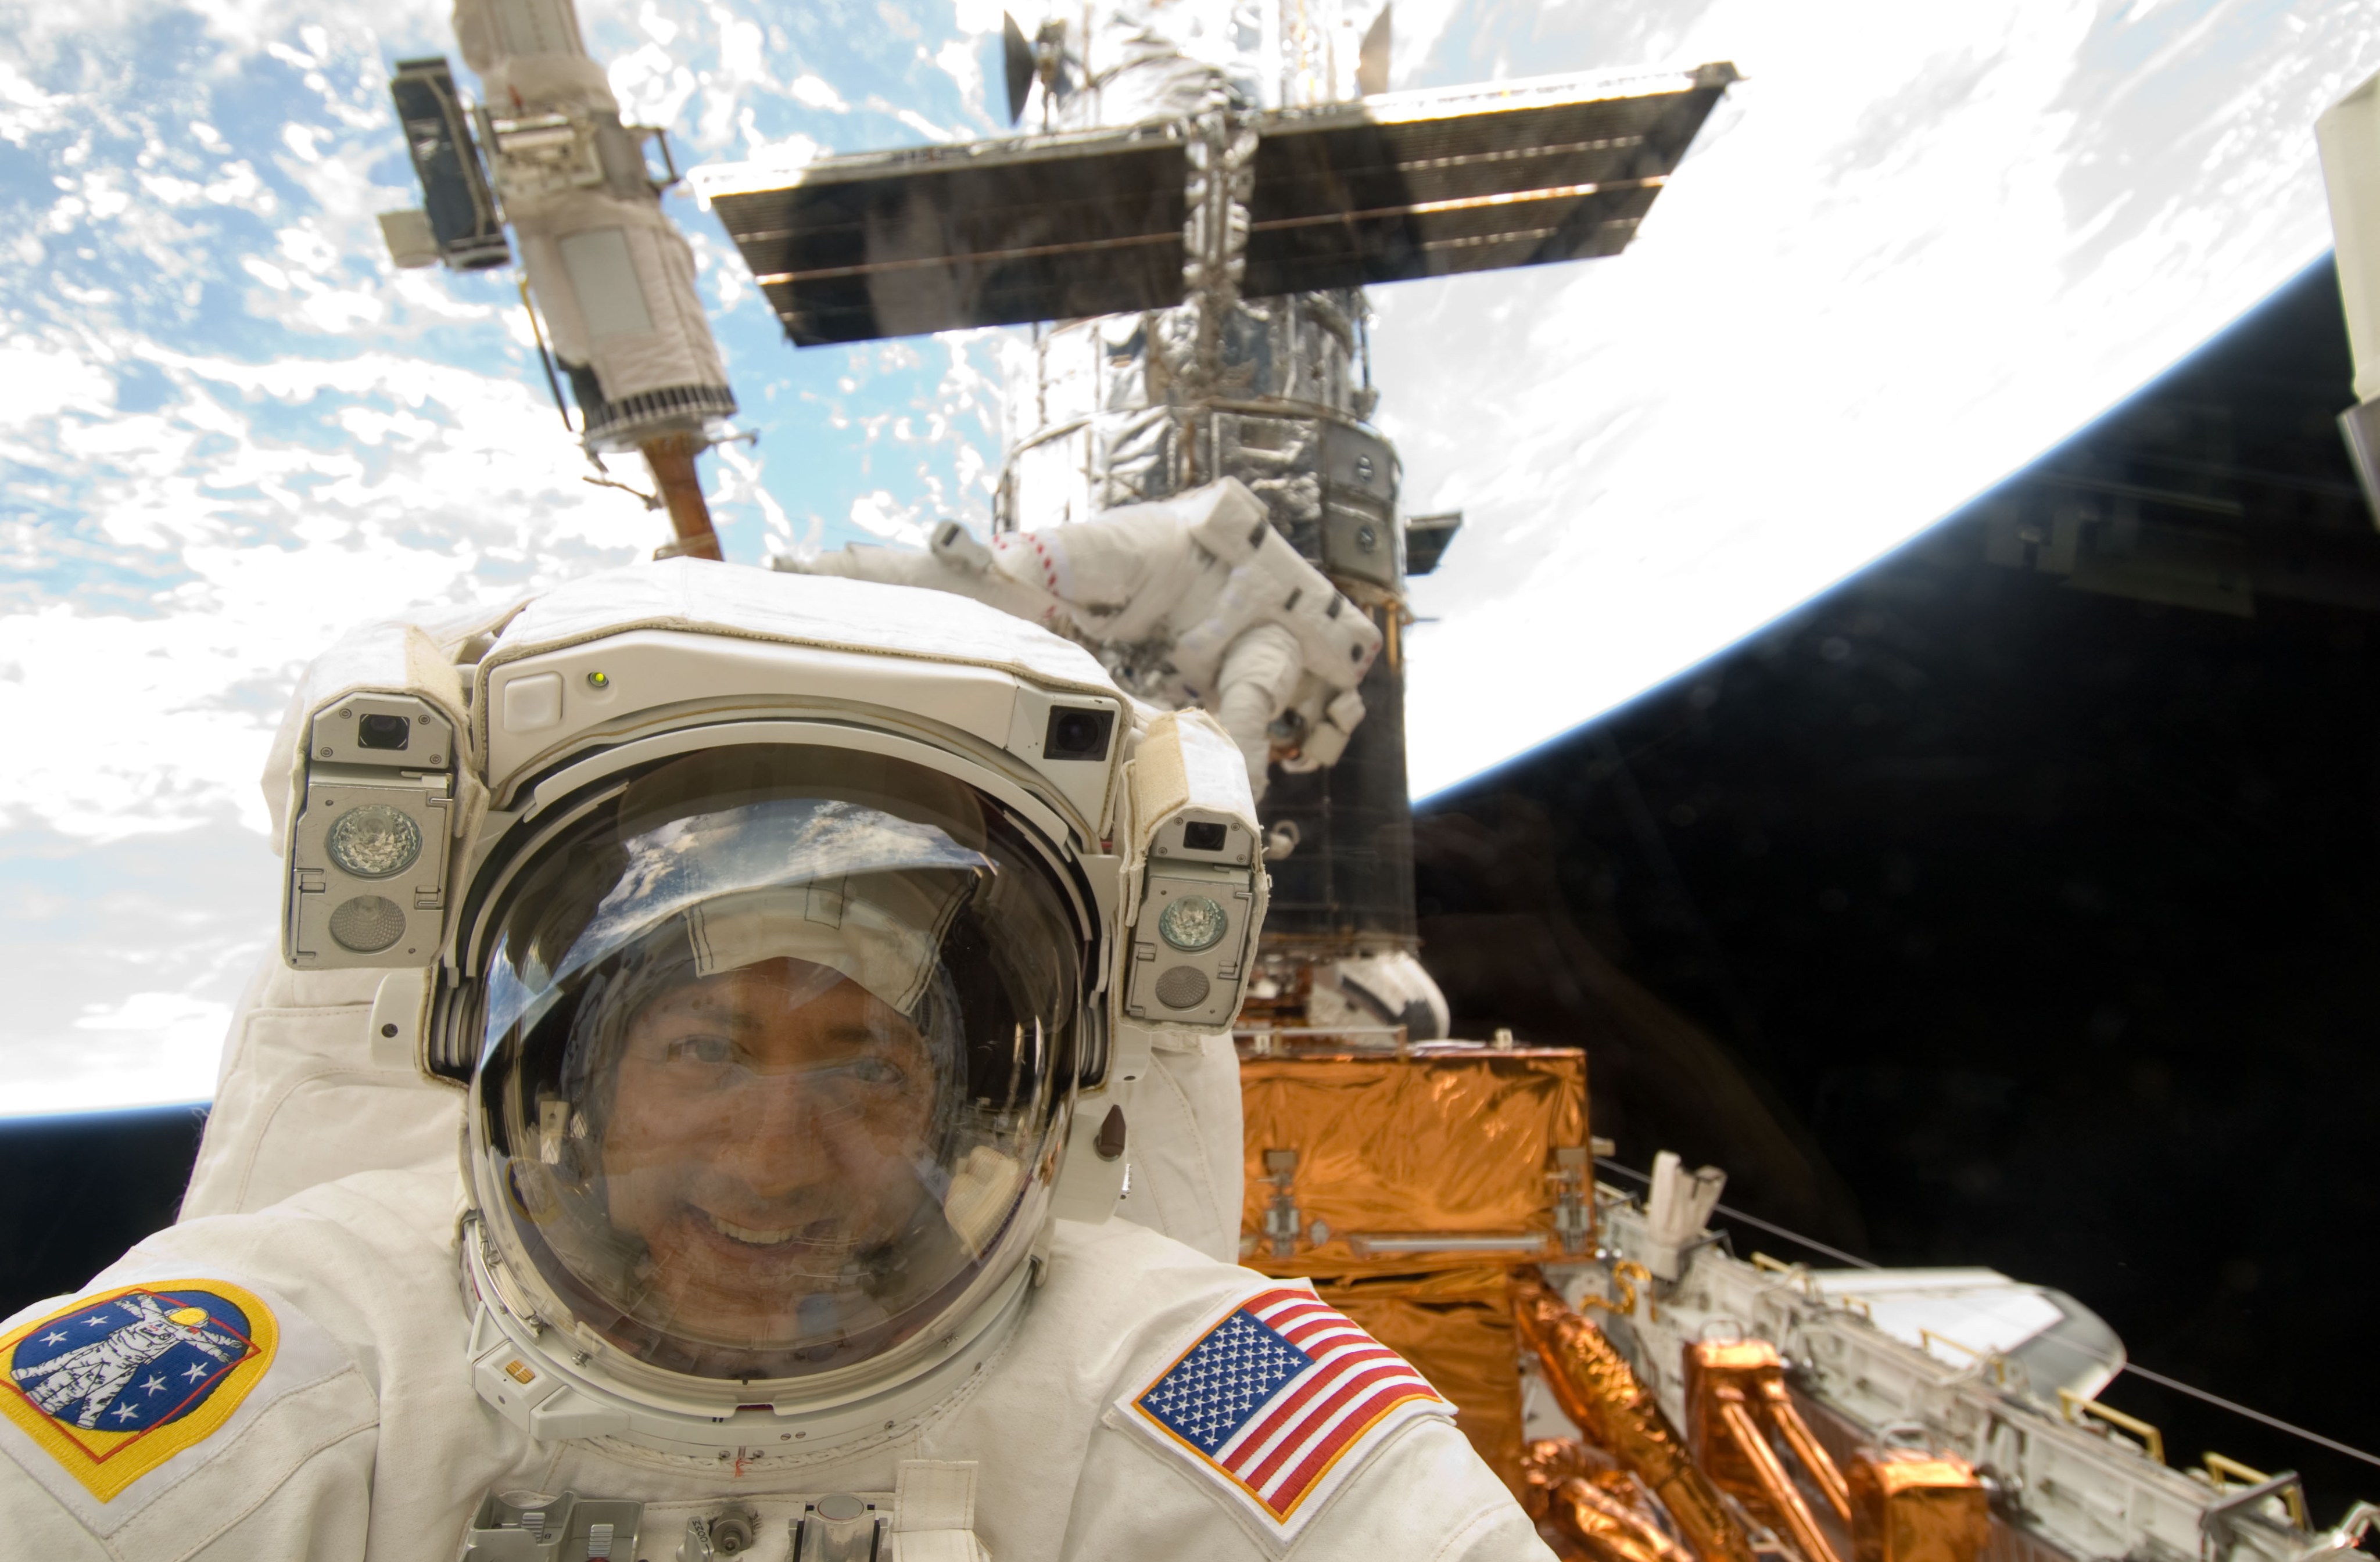 An astronaut poses for a picture through the back windows of the Space Shuttle.